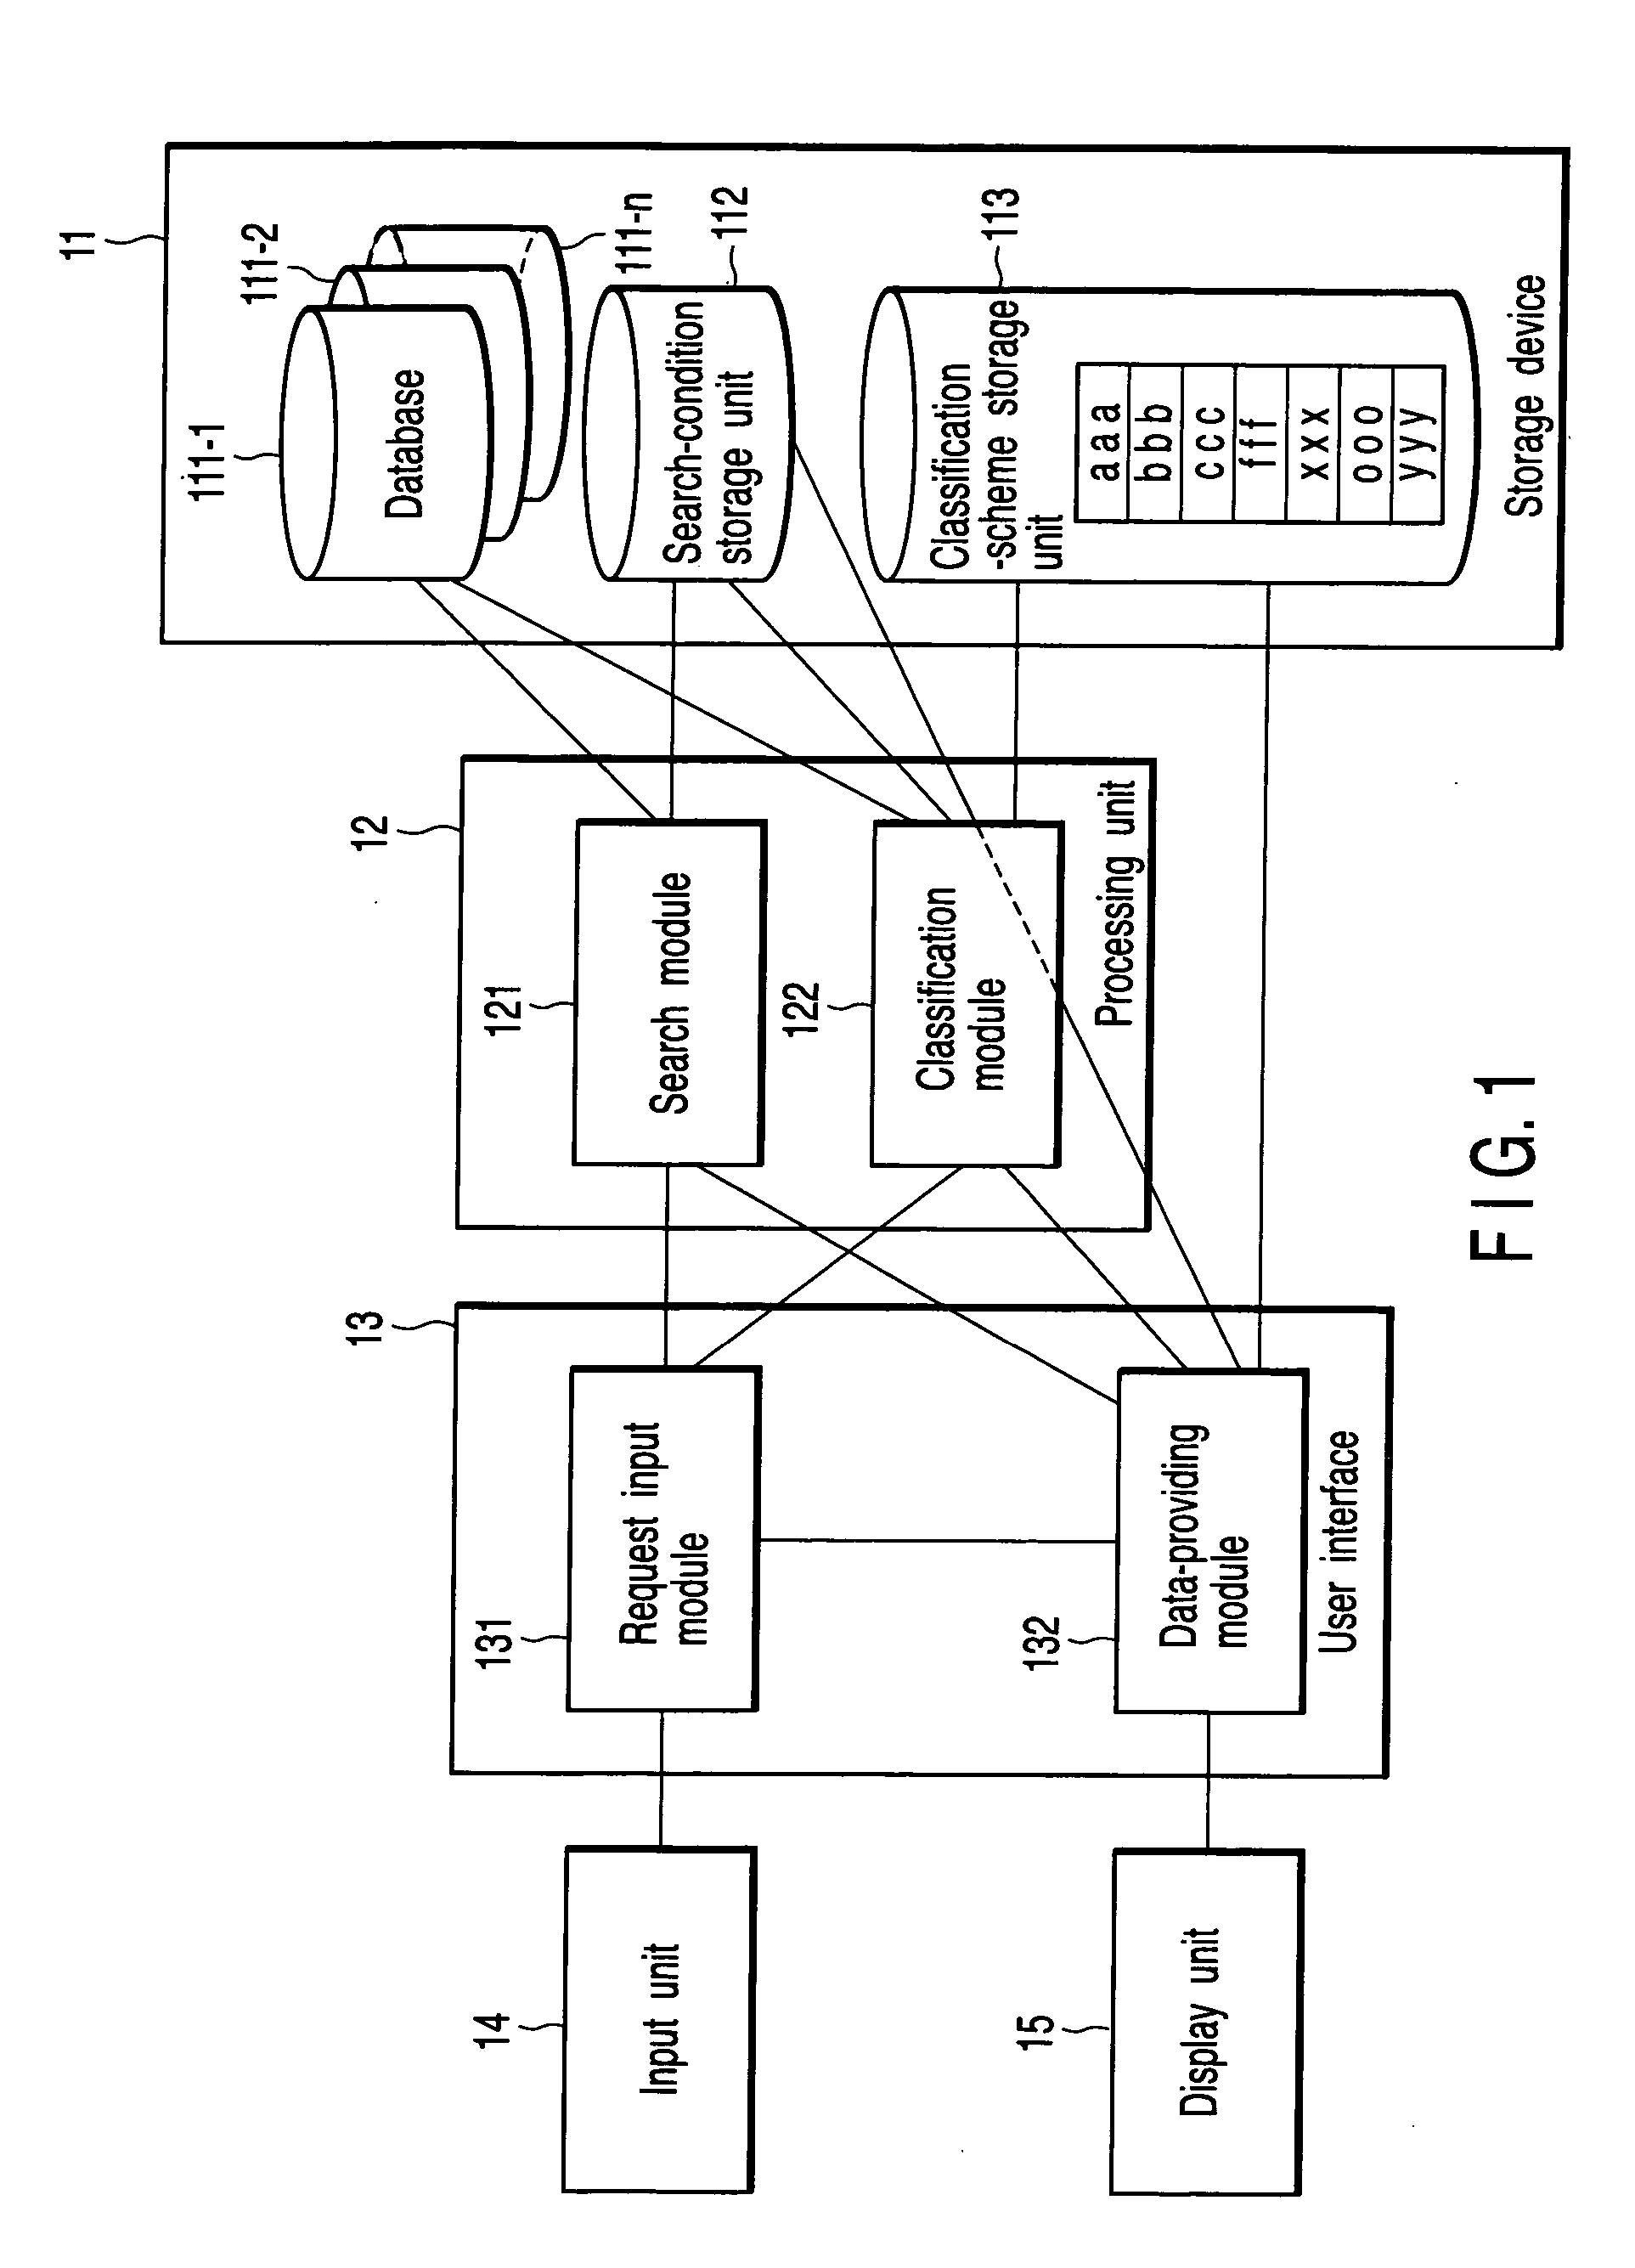 System and method for data classification usable for data search